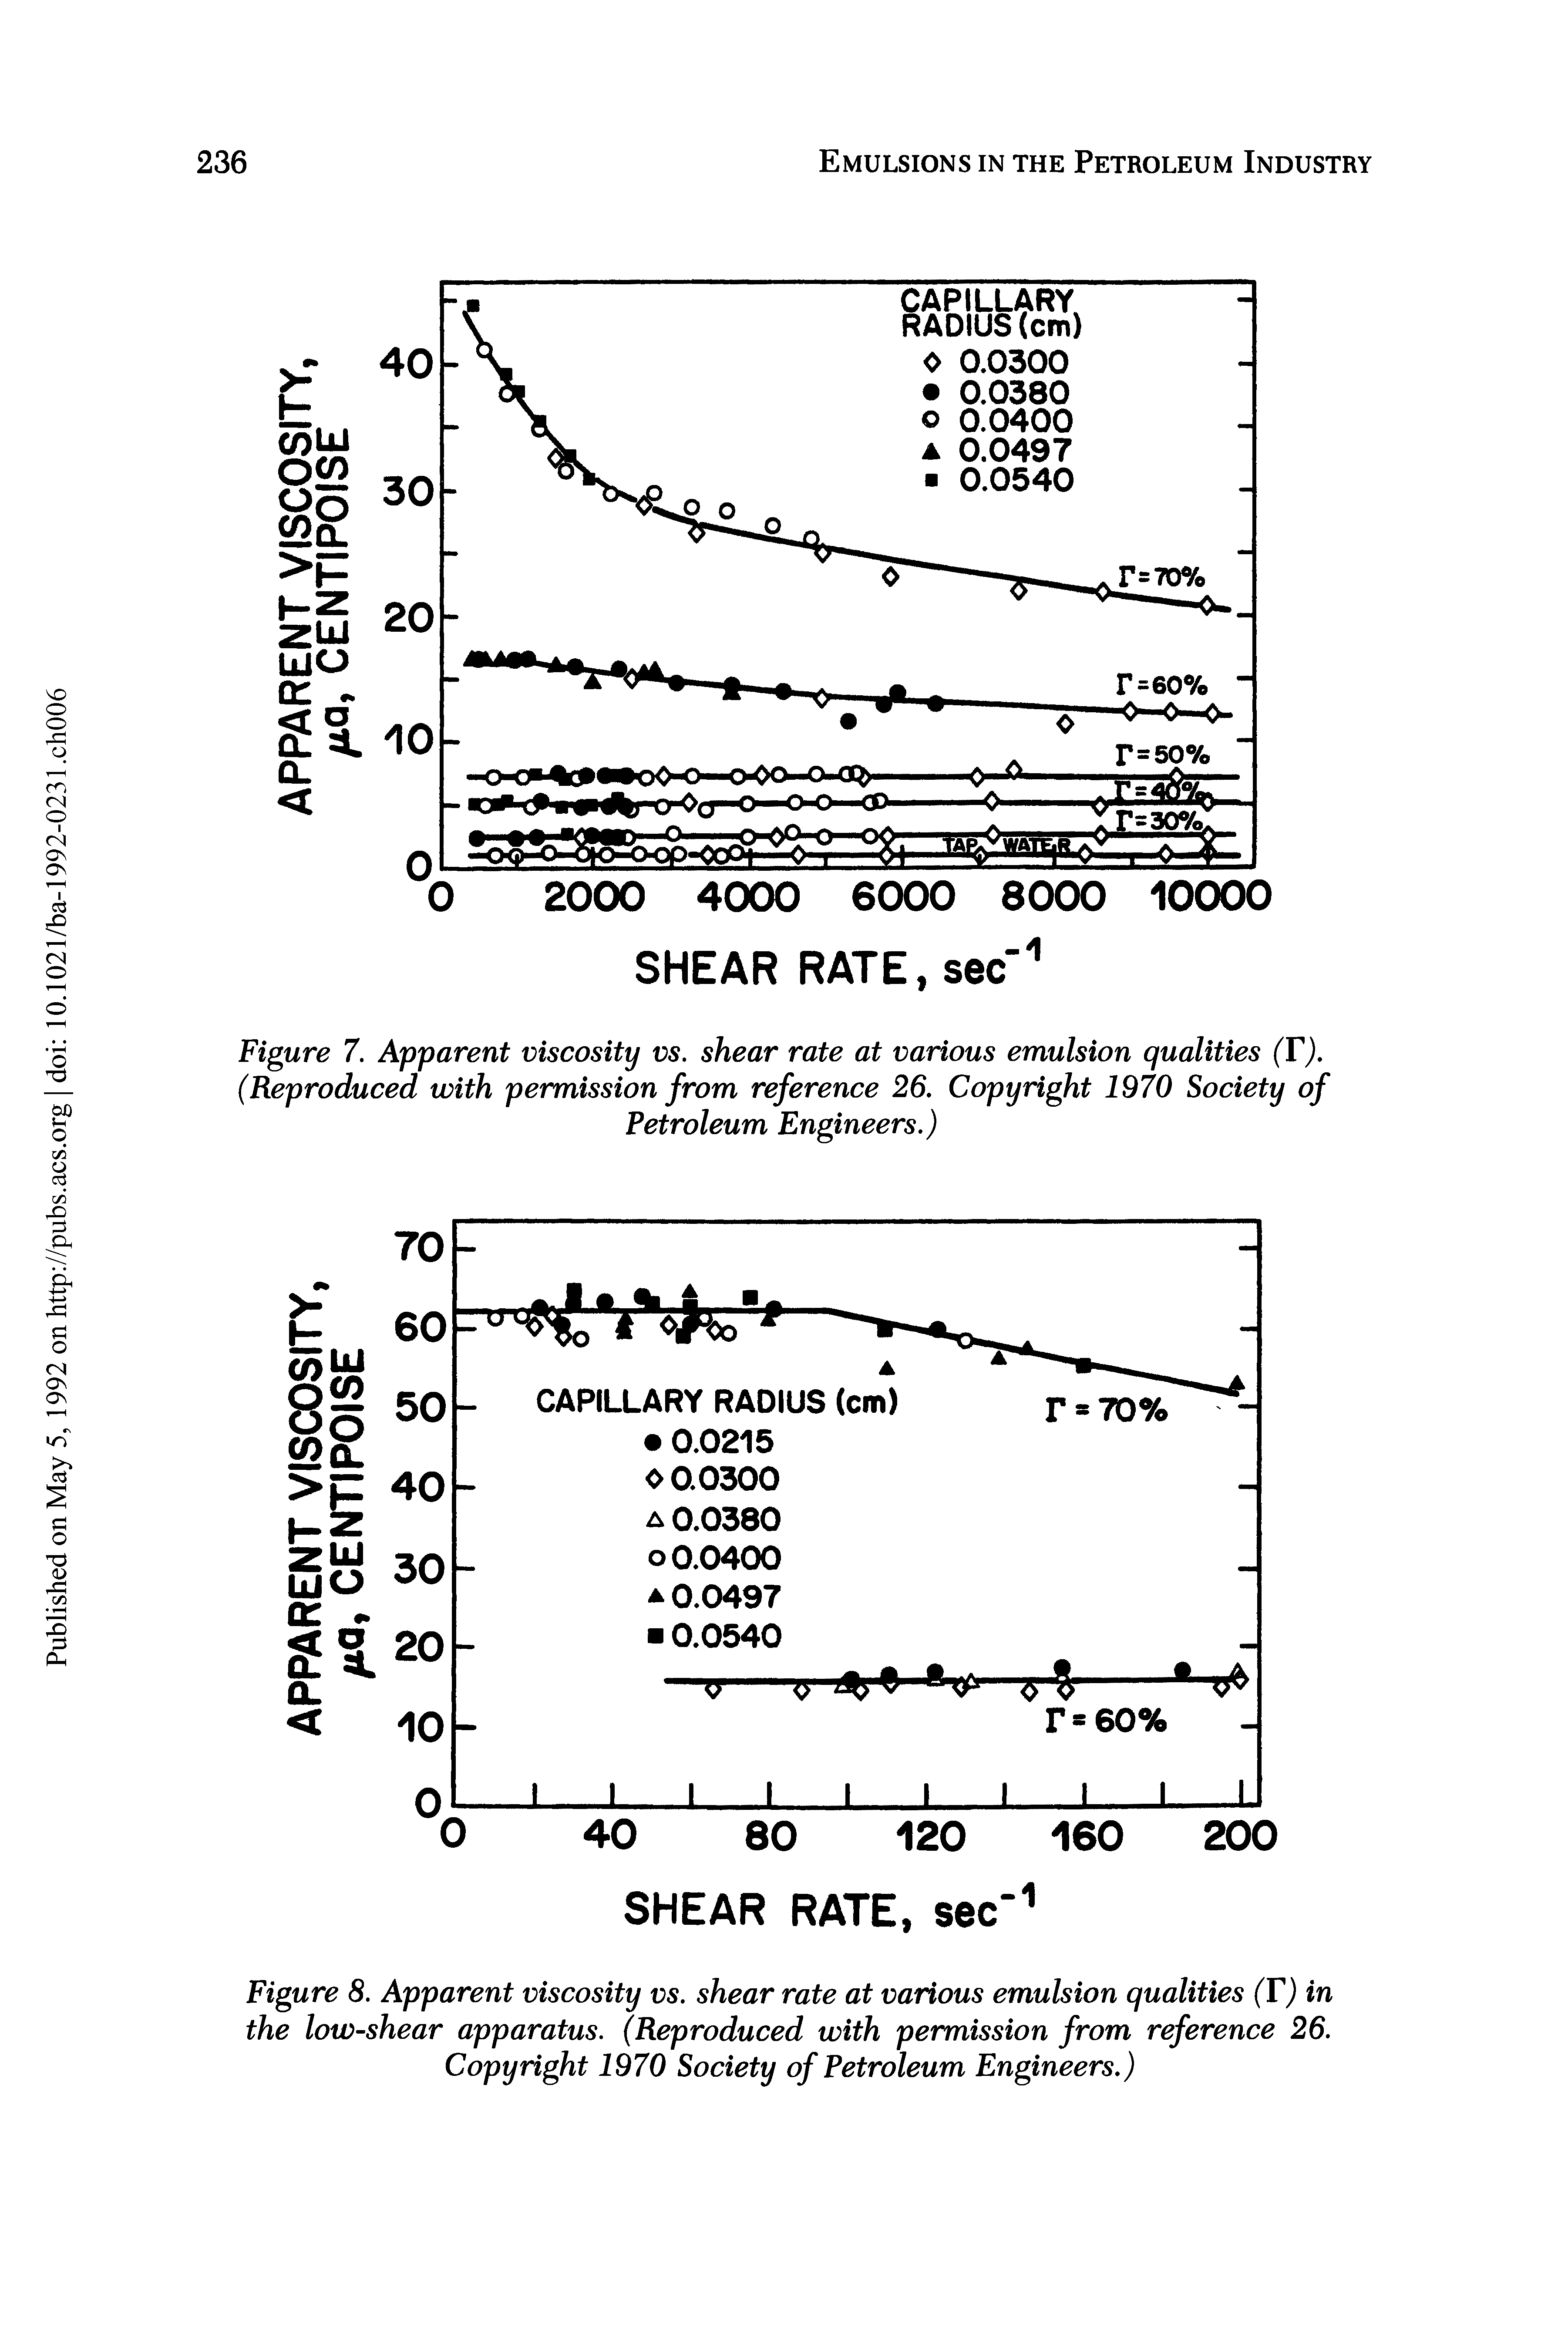 Figure 7. Apparent viscosity vs. shear rate at various emulsion qualities (Fj. (Reproduced with permission from reference 26. Copyright 1970 Society of Petroleum Engineers.)...